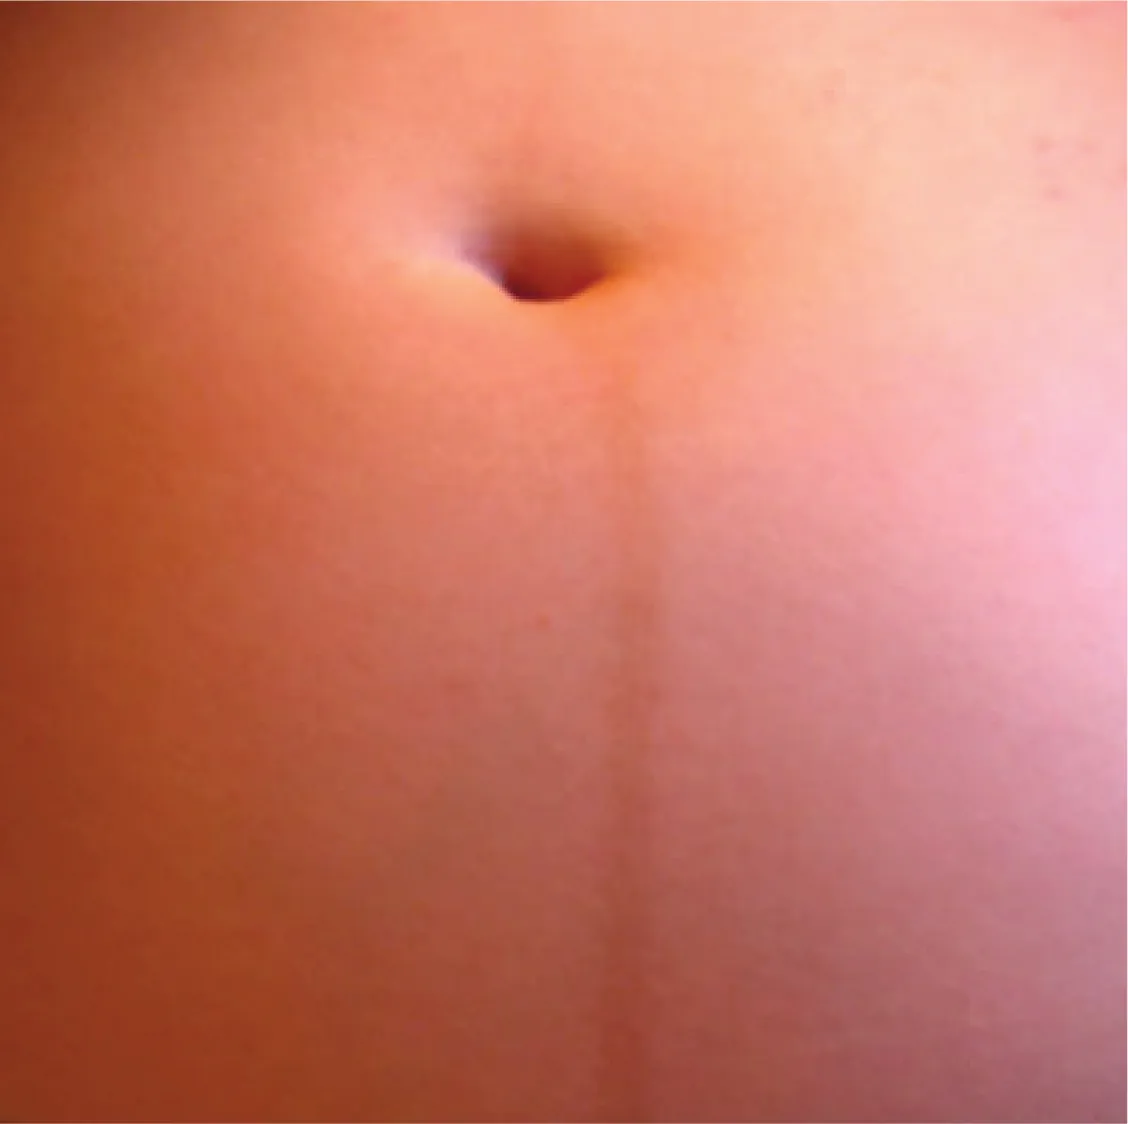 This photo shows a dark line below a woman’s navel.